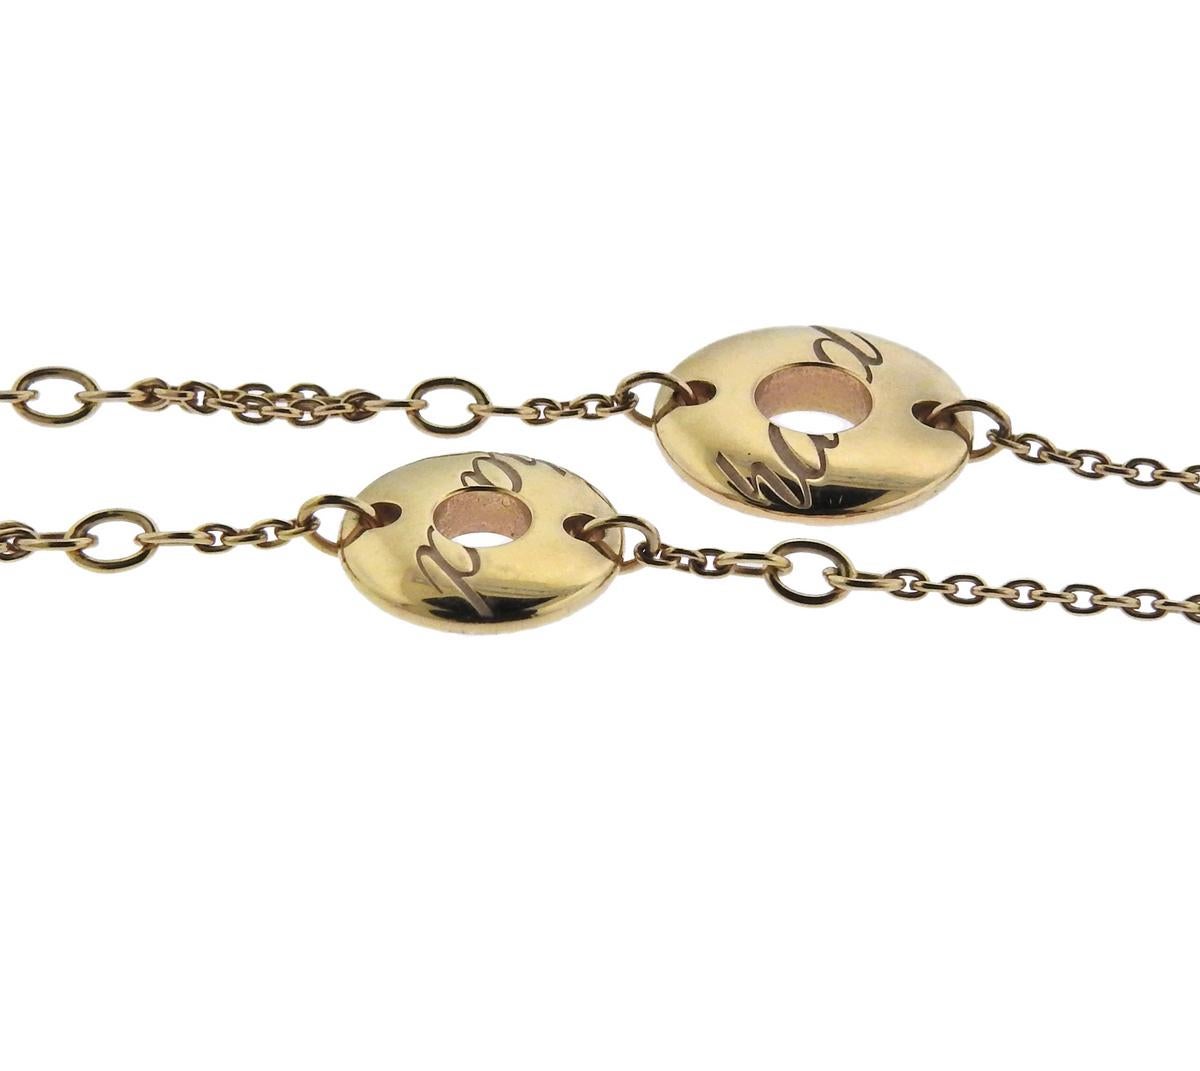 Women's Chopard Choppardissimo Gold Long Station Necklace